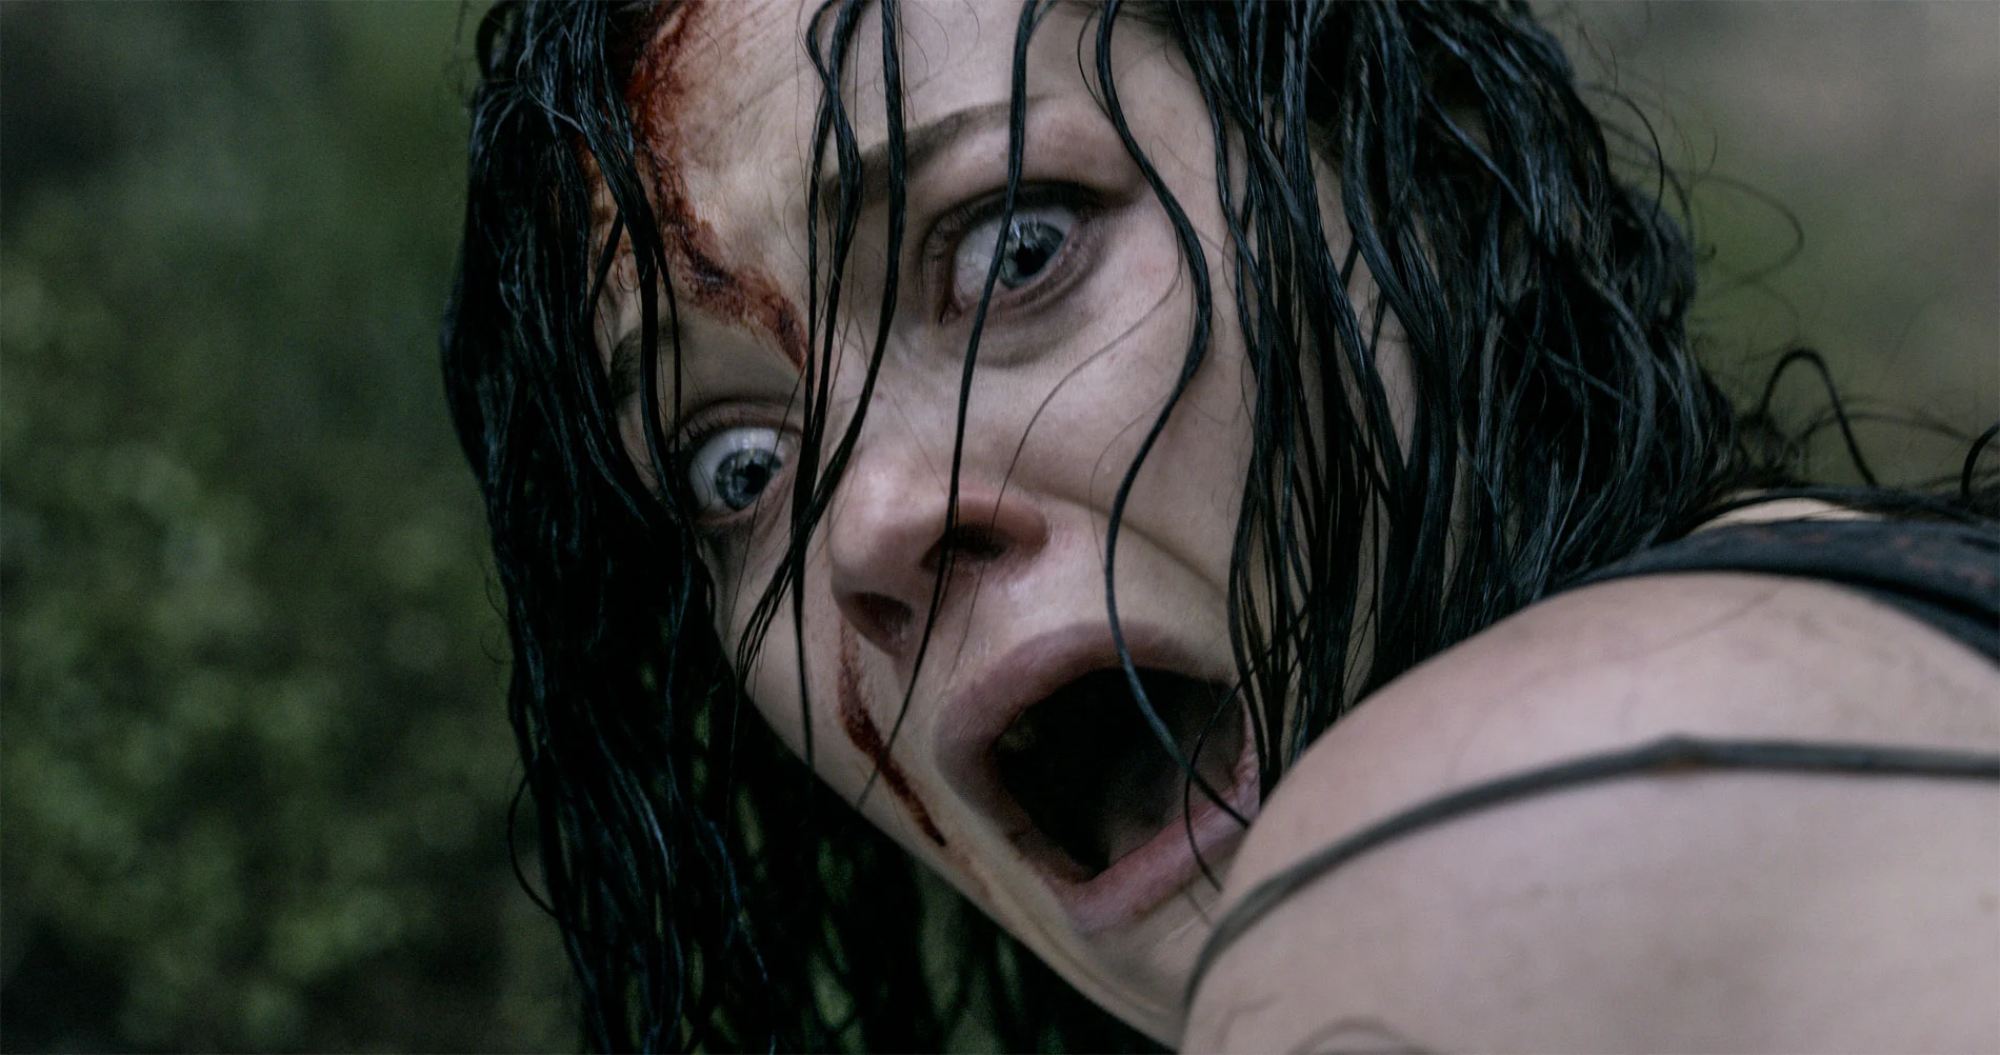 'Evil Dead' movies starring Jane Levy as Mia screaming, looking over her shoulder.